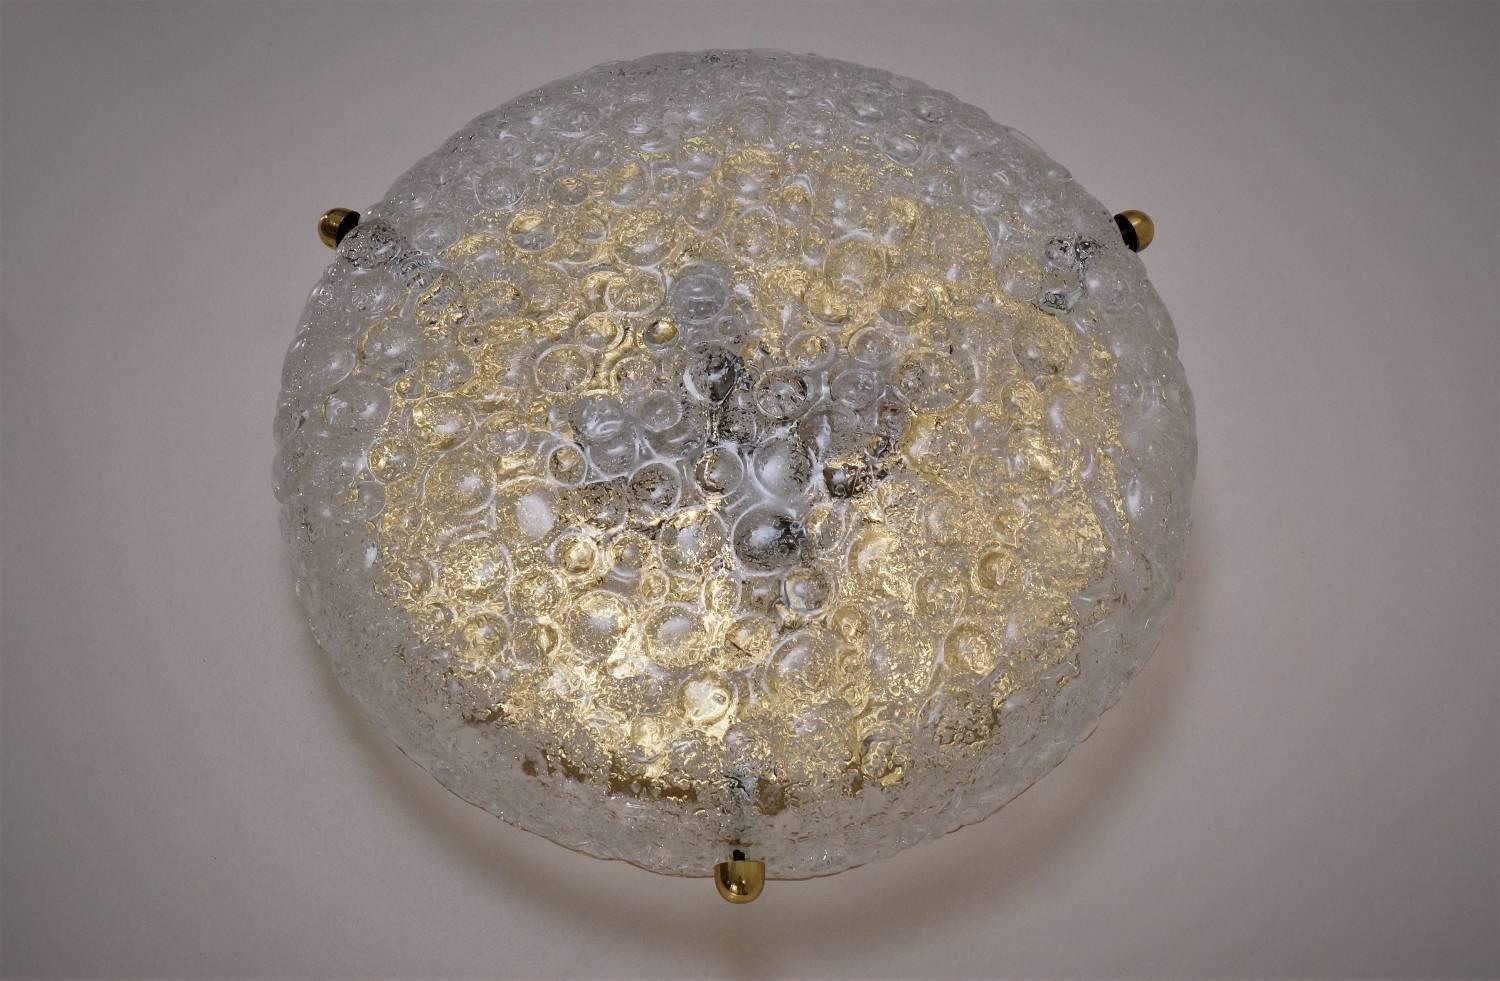 Brass flush light with glass shade by Hillebrand Lighting, circa 1970s, German.

Thoroughly cleaned respecting the vintage patina. Newly rewired, earthed, in full working order & ready to install. Light bulbs included. It is possible to install